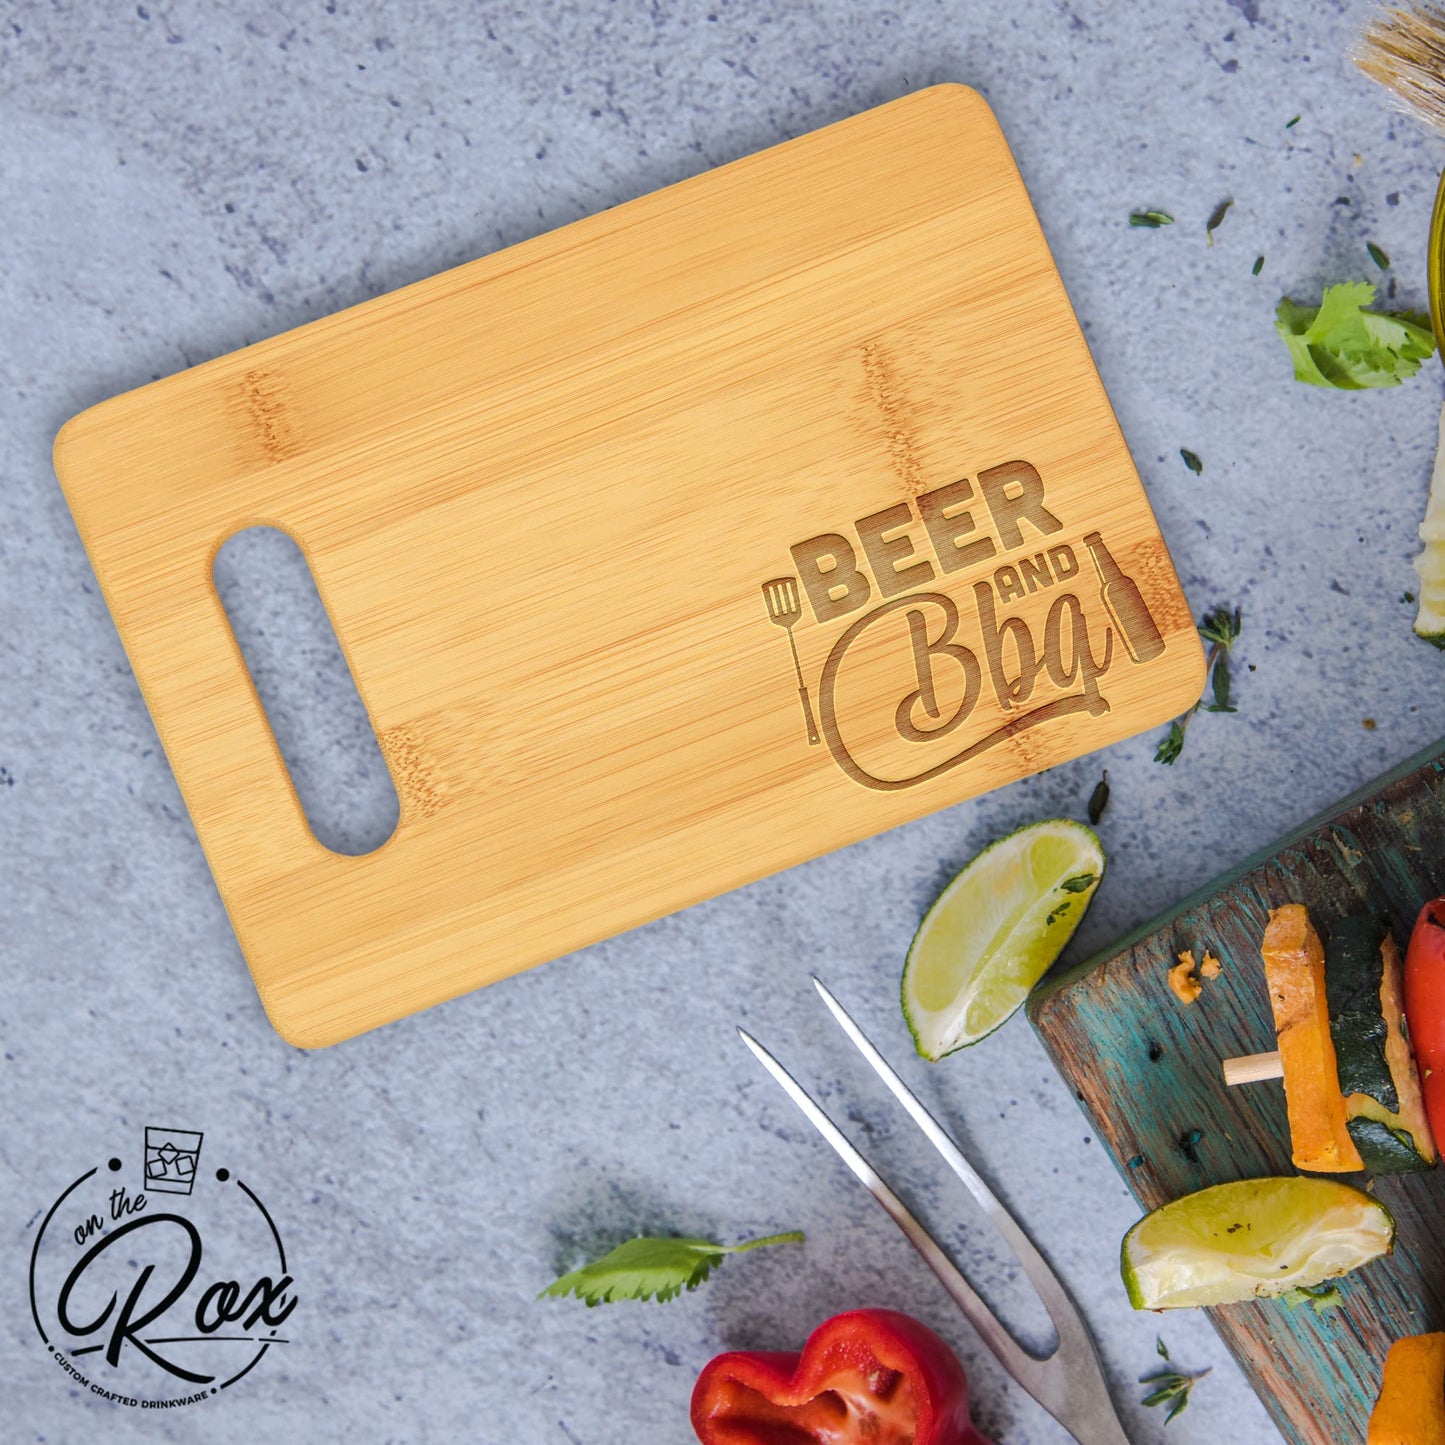 On The Rox Gifts for Dad - Beer and BBQ Cutting Board (9”x6”) - Personalized Dad Gifts for Men - Engraved Bamboo Board for Grill Fathers, Papa, Stepdad -  Best Dad Ever Birthday, Fathers' Day Gifts